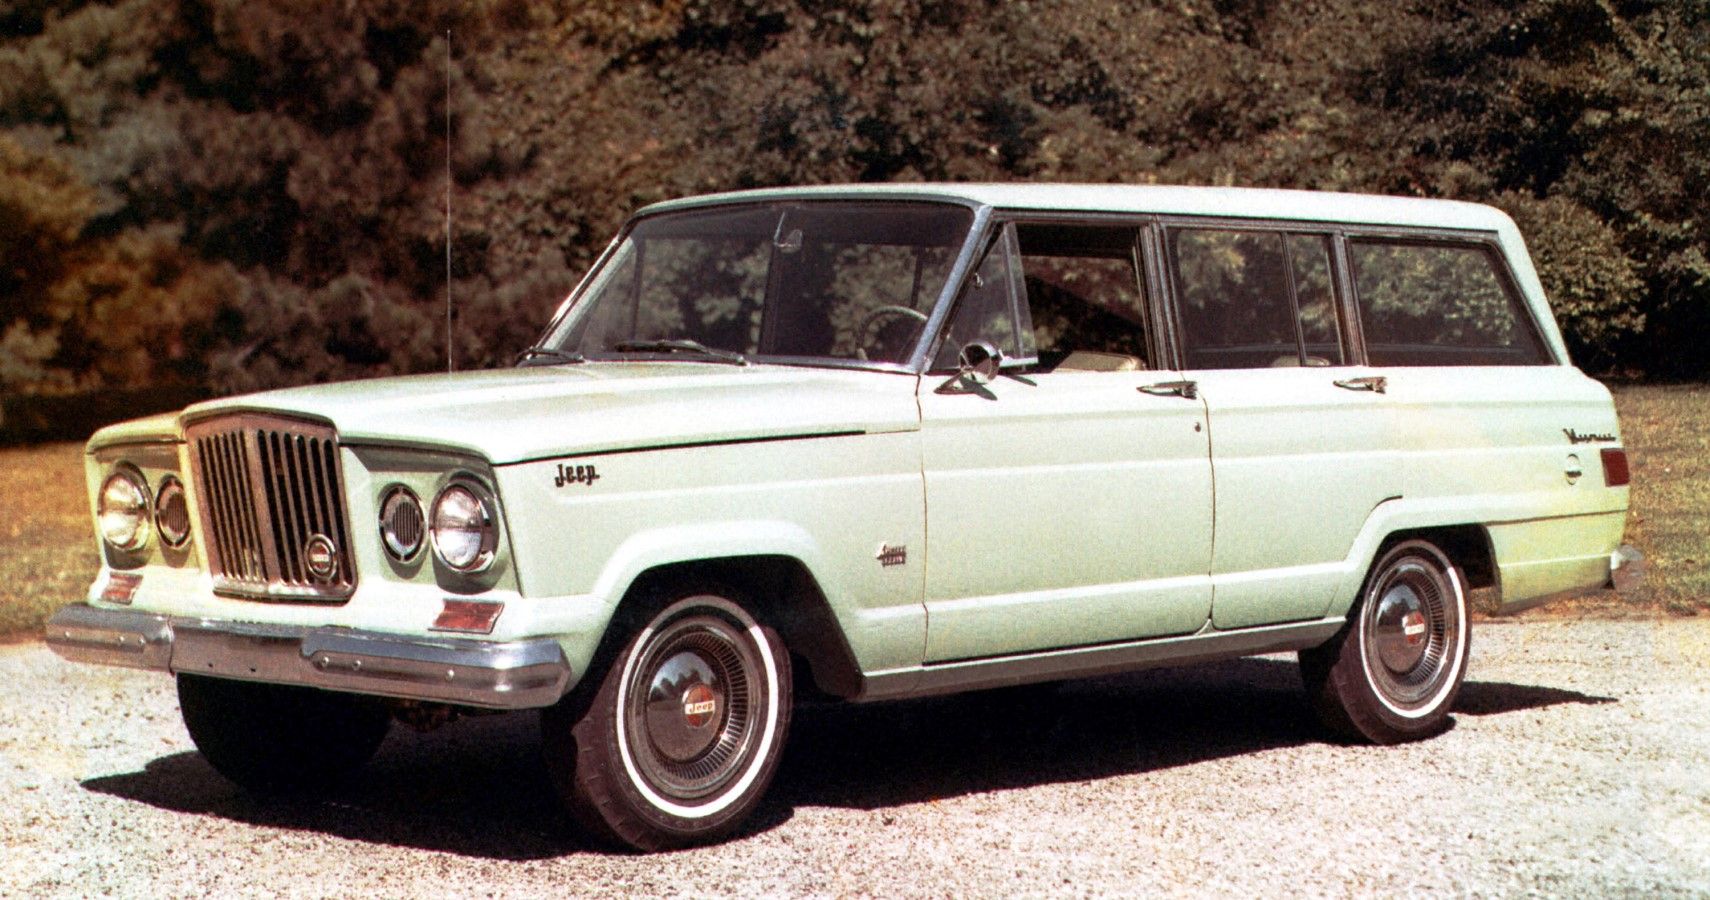 1963 Jeep Wagoneer front third quarter view